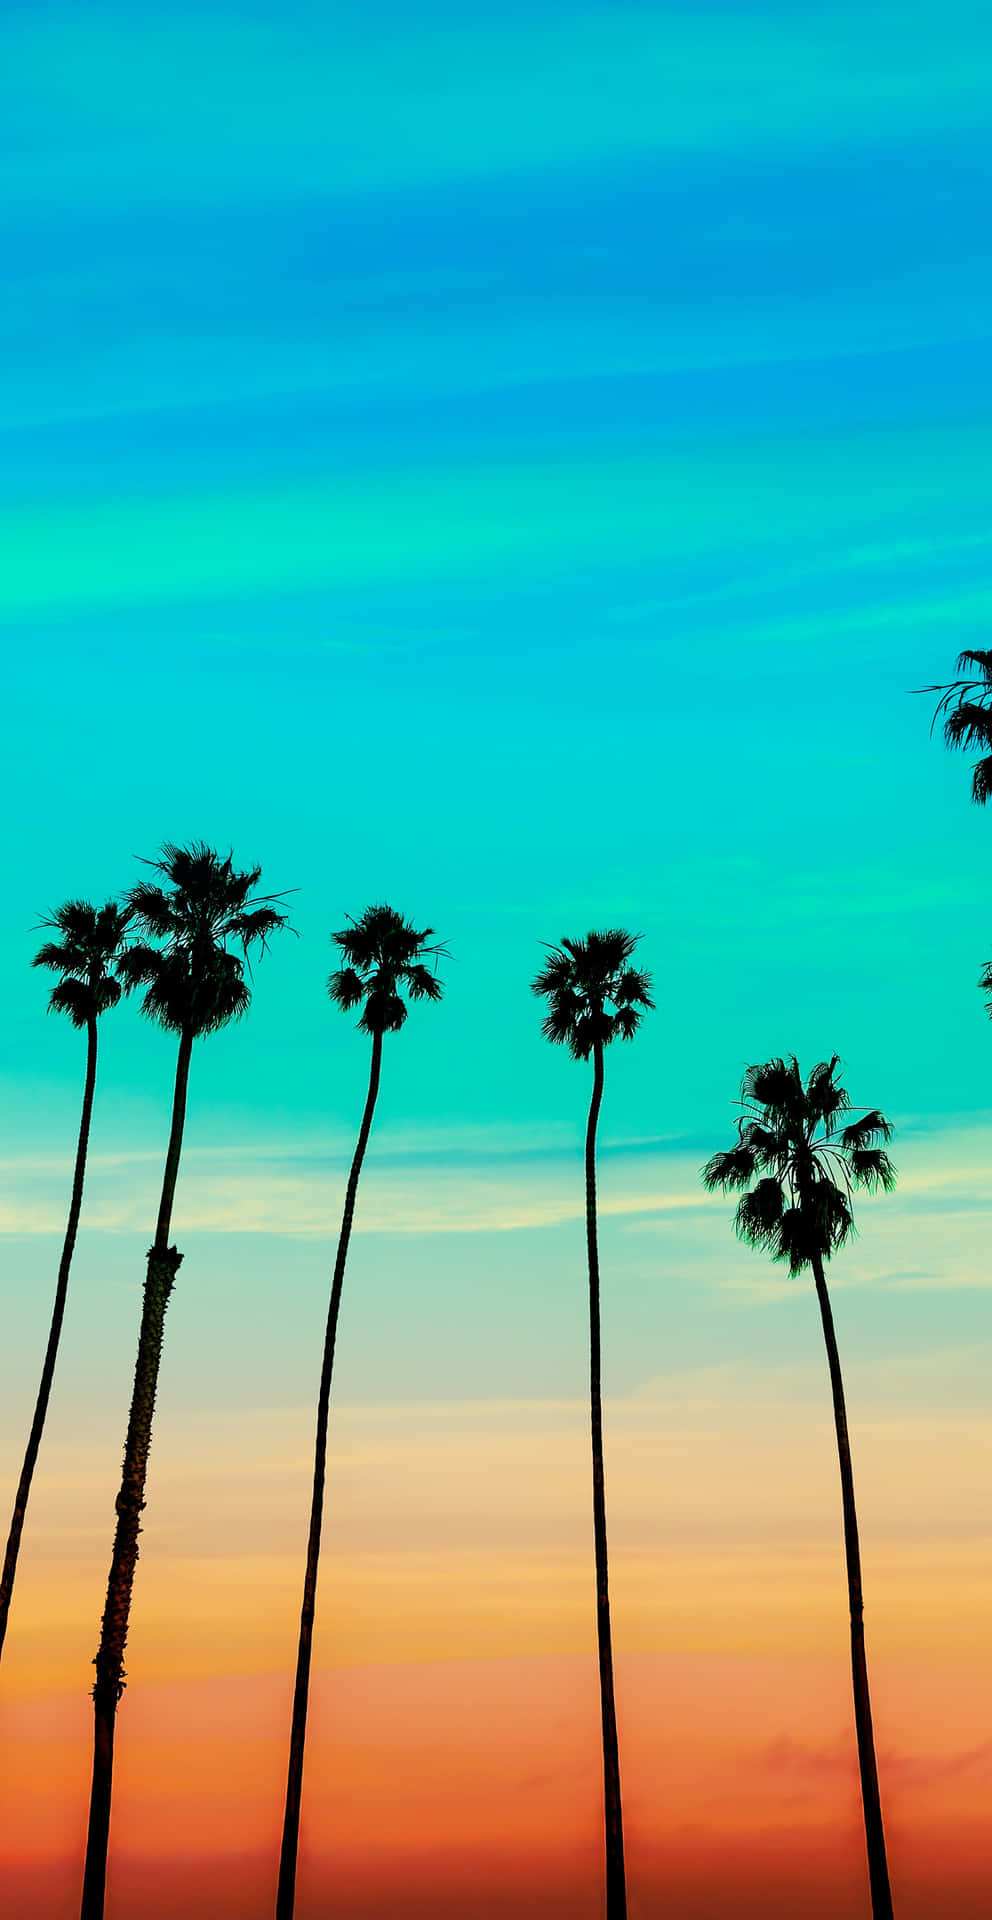 Palm Trees Silhouetted Against A Colorful Sunset Wallpaper